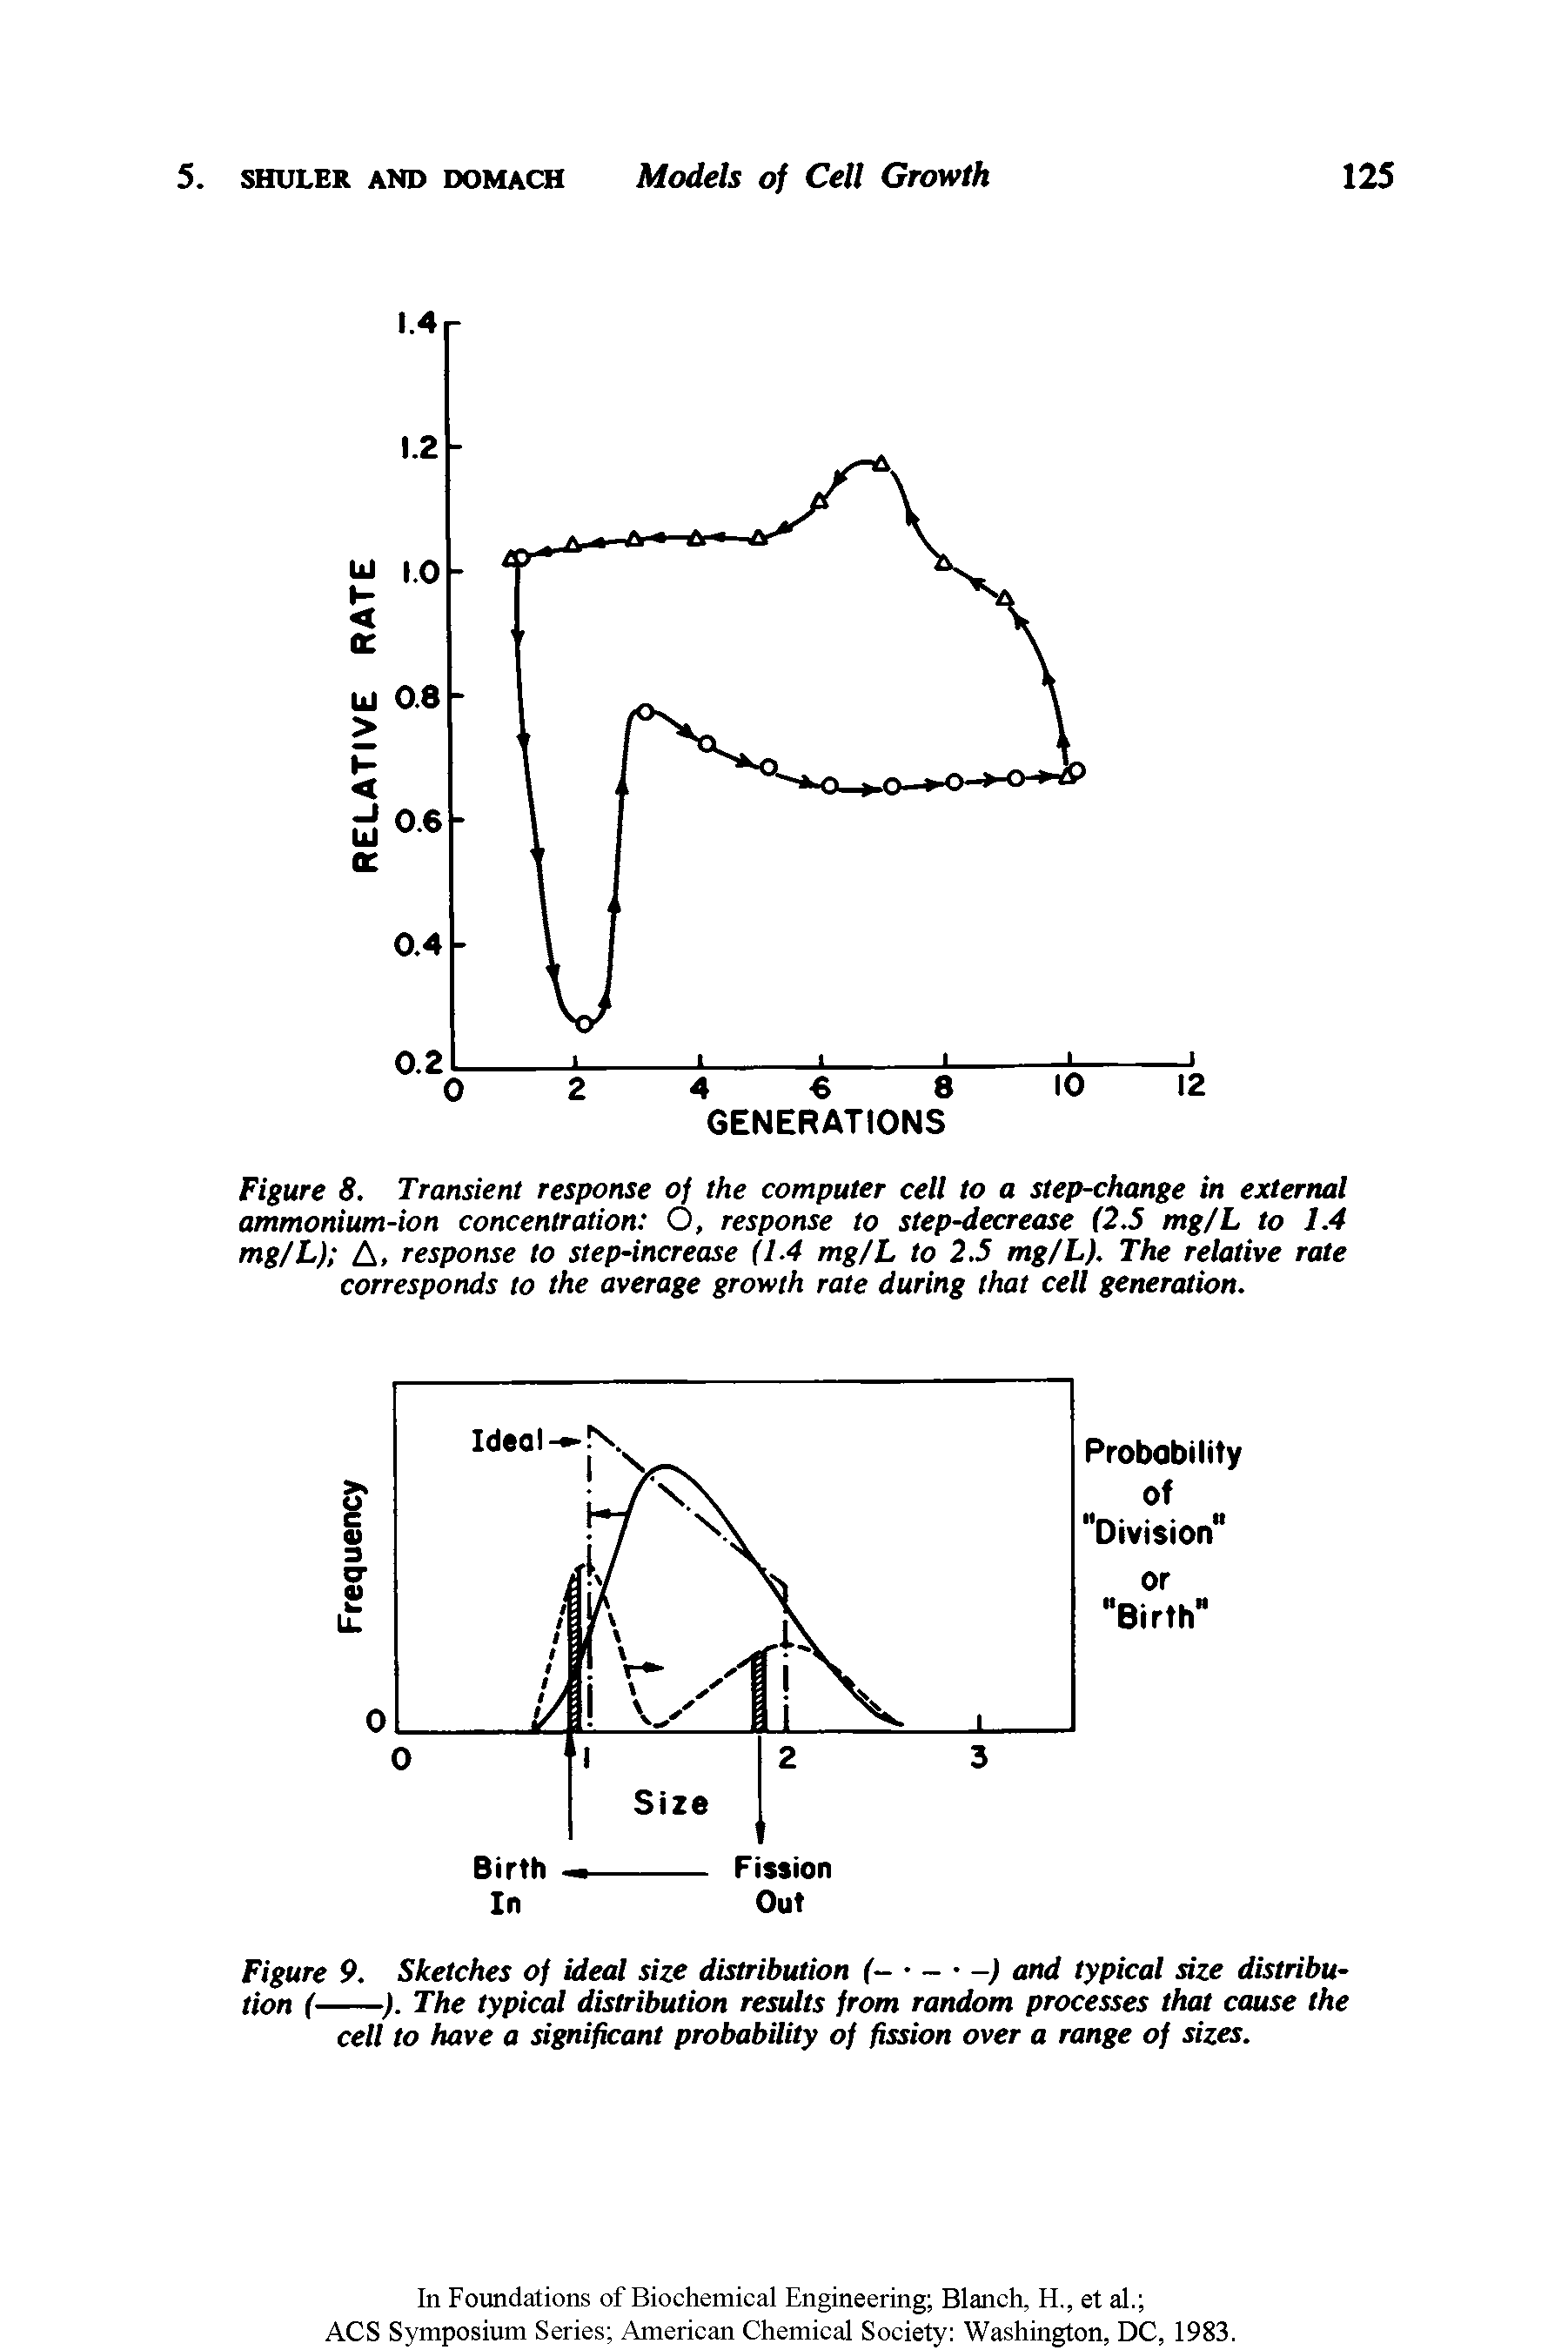 Figure 8. Transient response of the computer cell to a step-change in exterruil ammonium-ion concentration O, response to step-decrease (2.5 mg/L to 1.4 mg/L) A. response to step-increase (1.4 mg/L to 2.5 mg/L). The relative rate corresponds to the average growth rate during that cell generation.